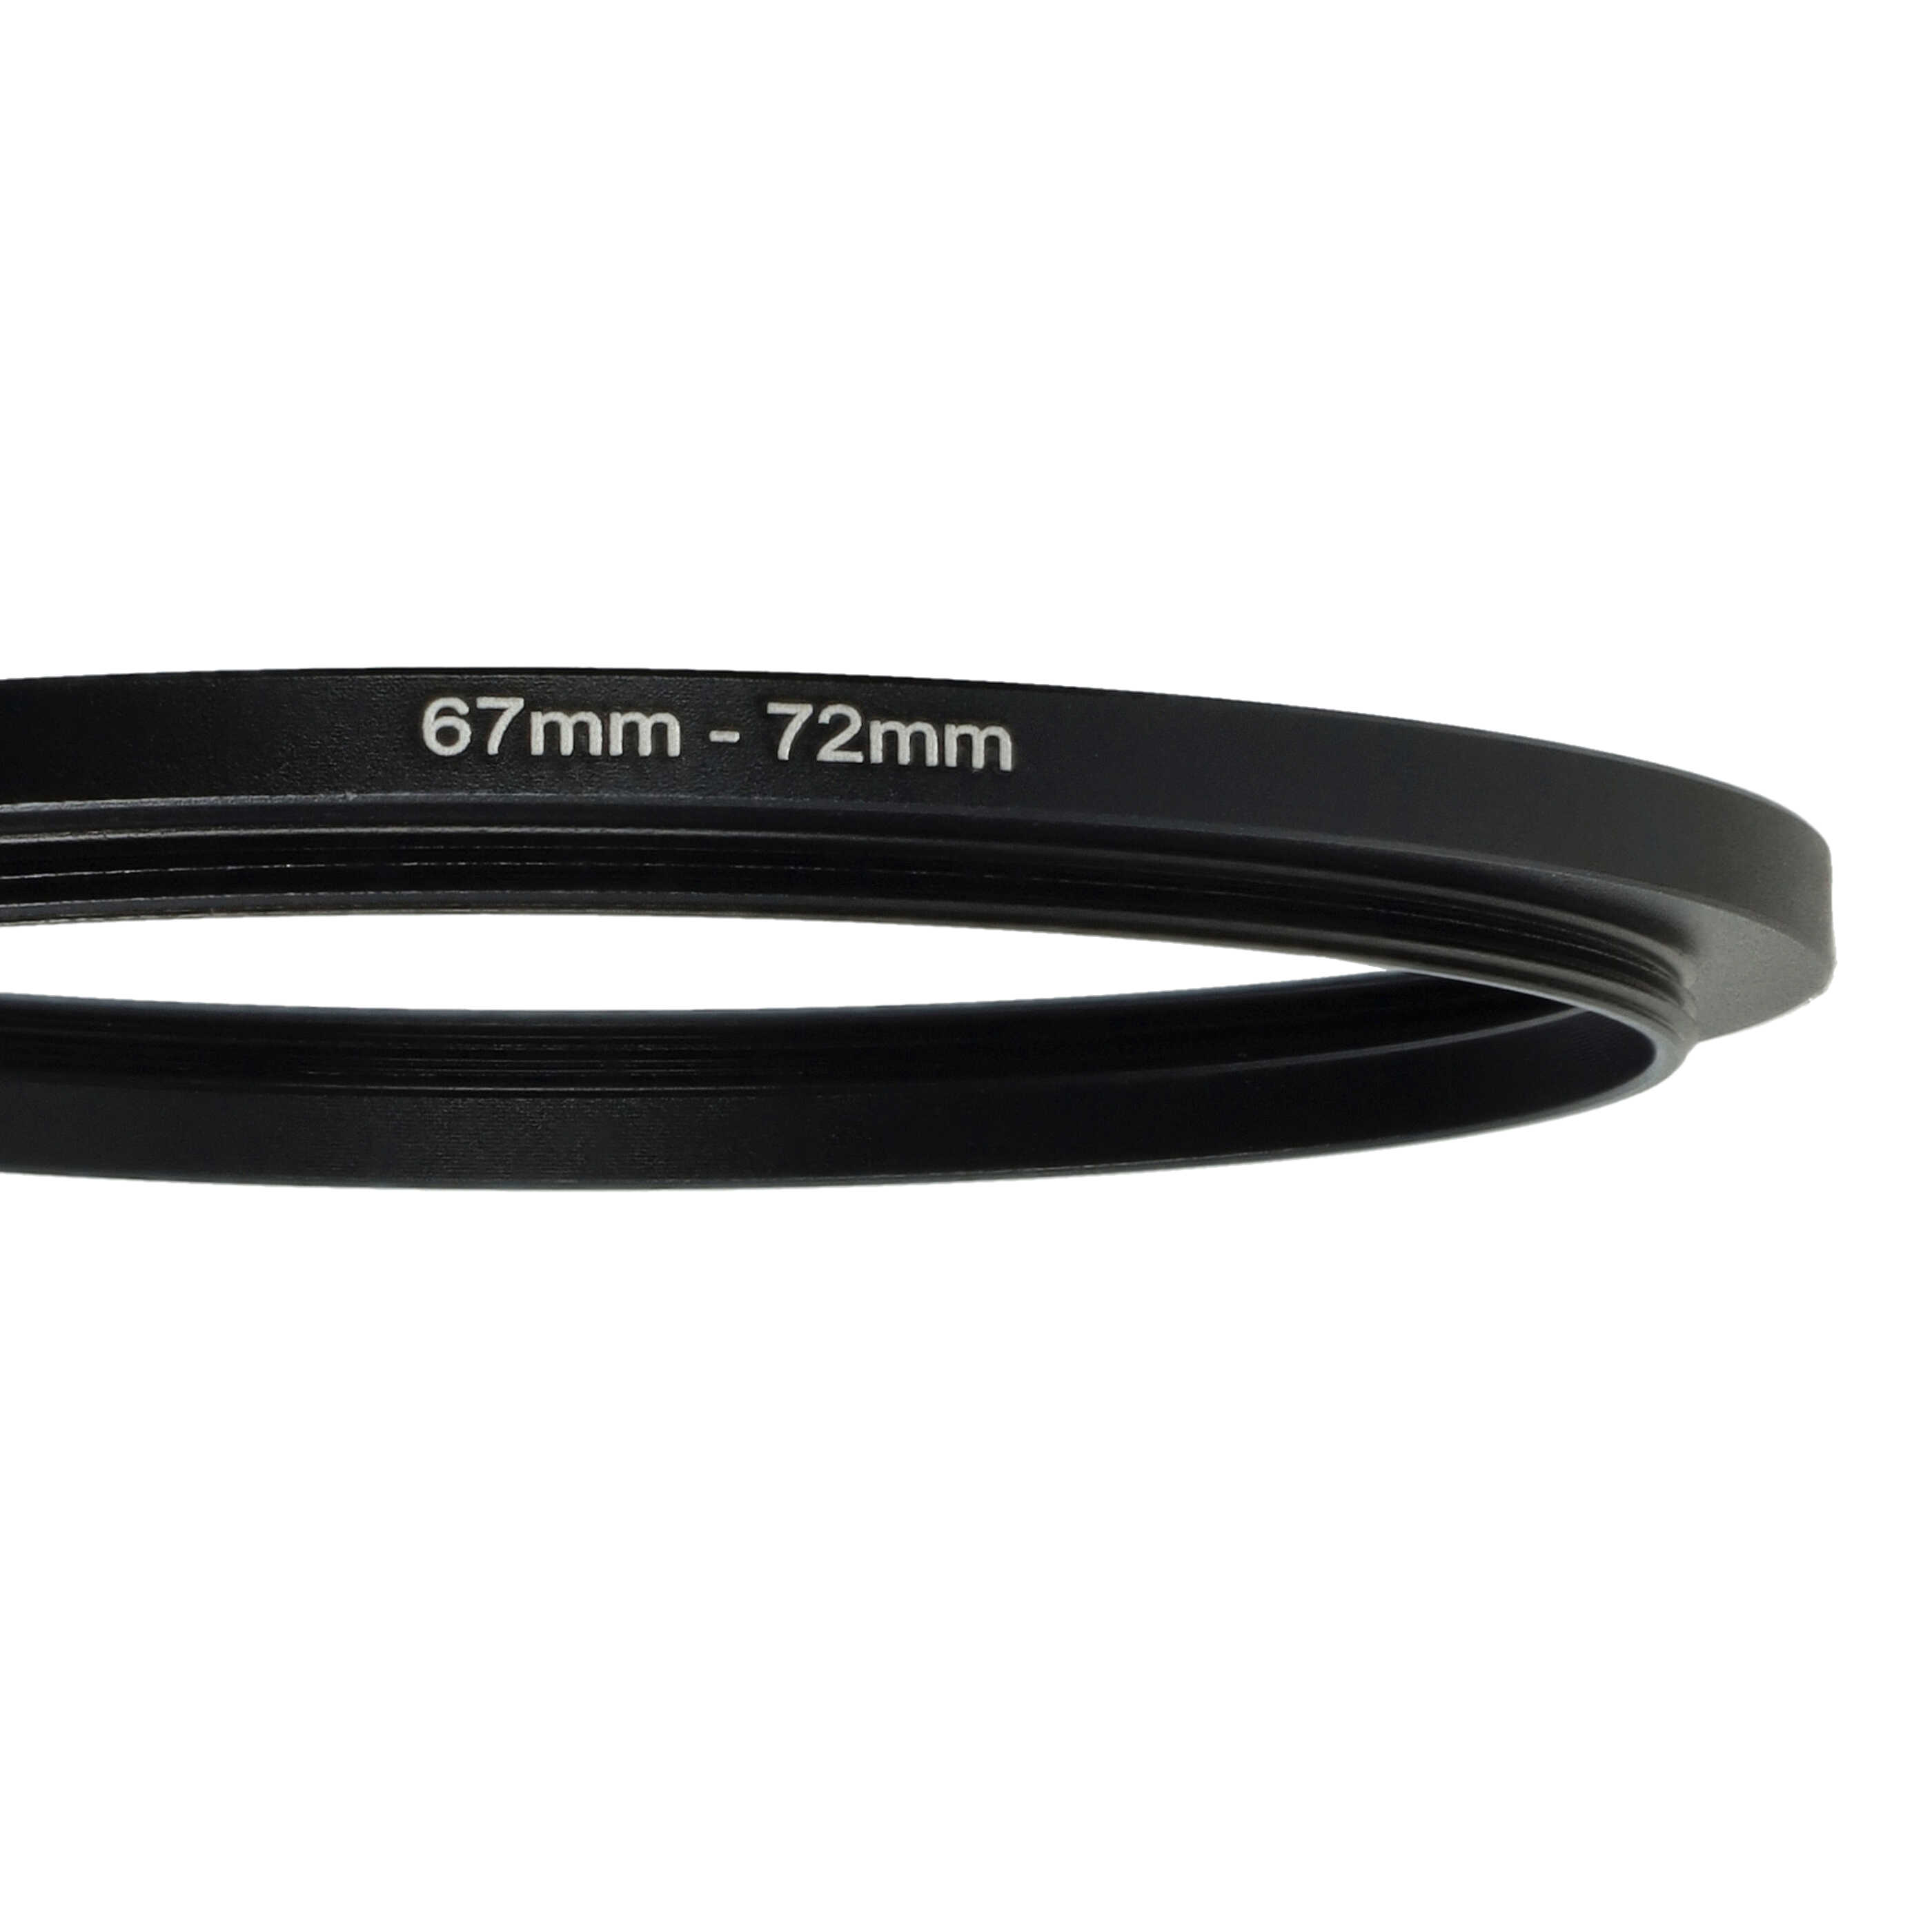 Step-Up Ring Adapter of 67 mm to 72 mmfor various Camera Lens - Filter Adapter